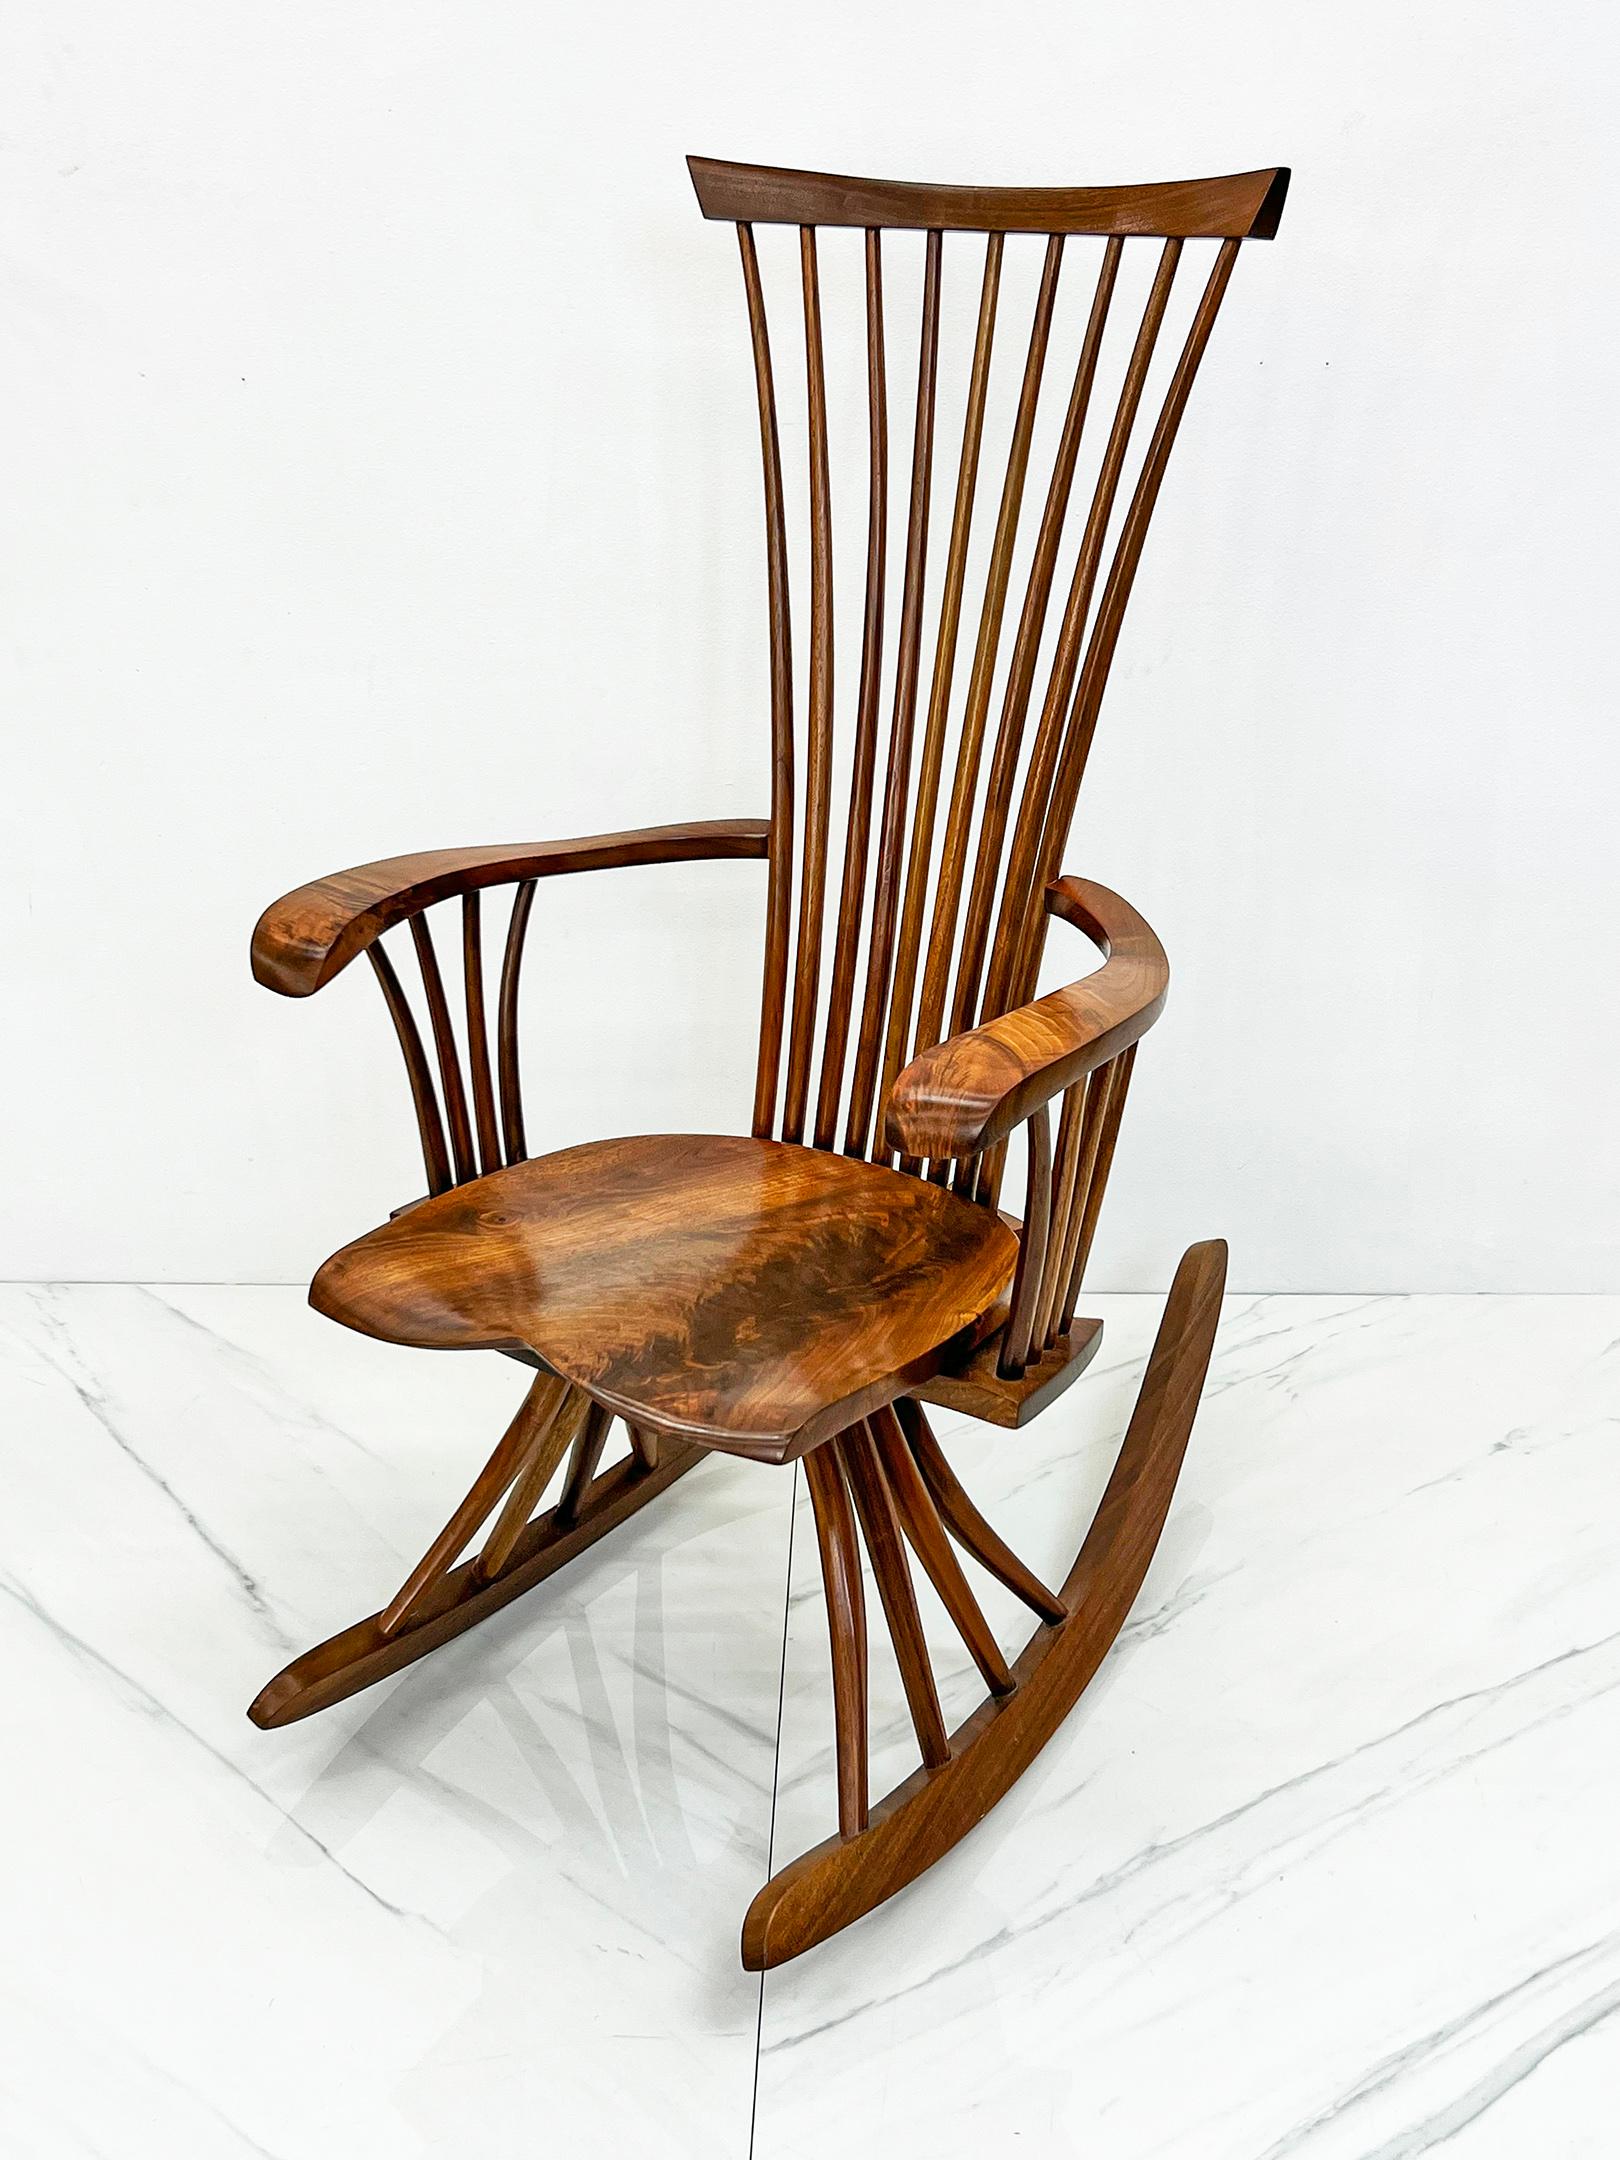 Studio Craft Sculpted Walnut Rocking Chair By Jeffrey Greene In Good Condition For Sale In Culver City, CA